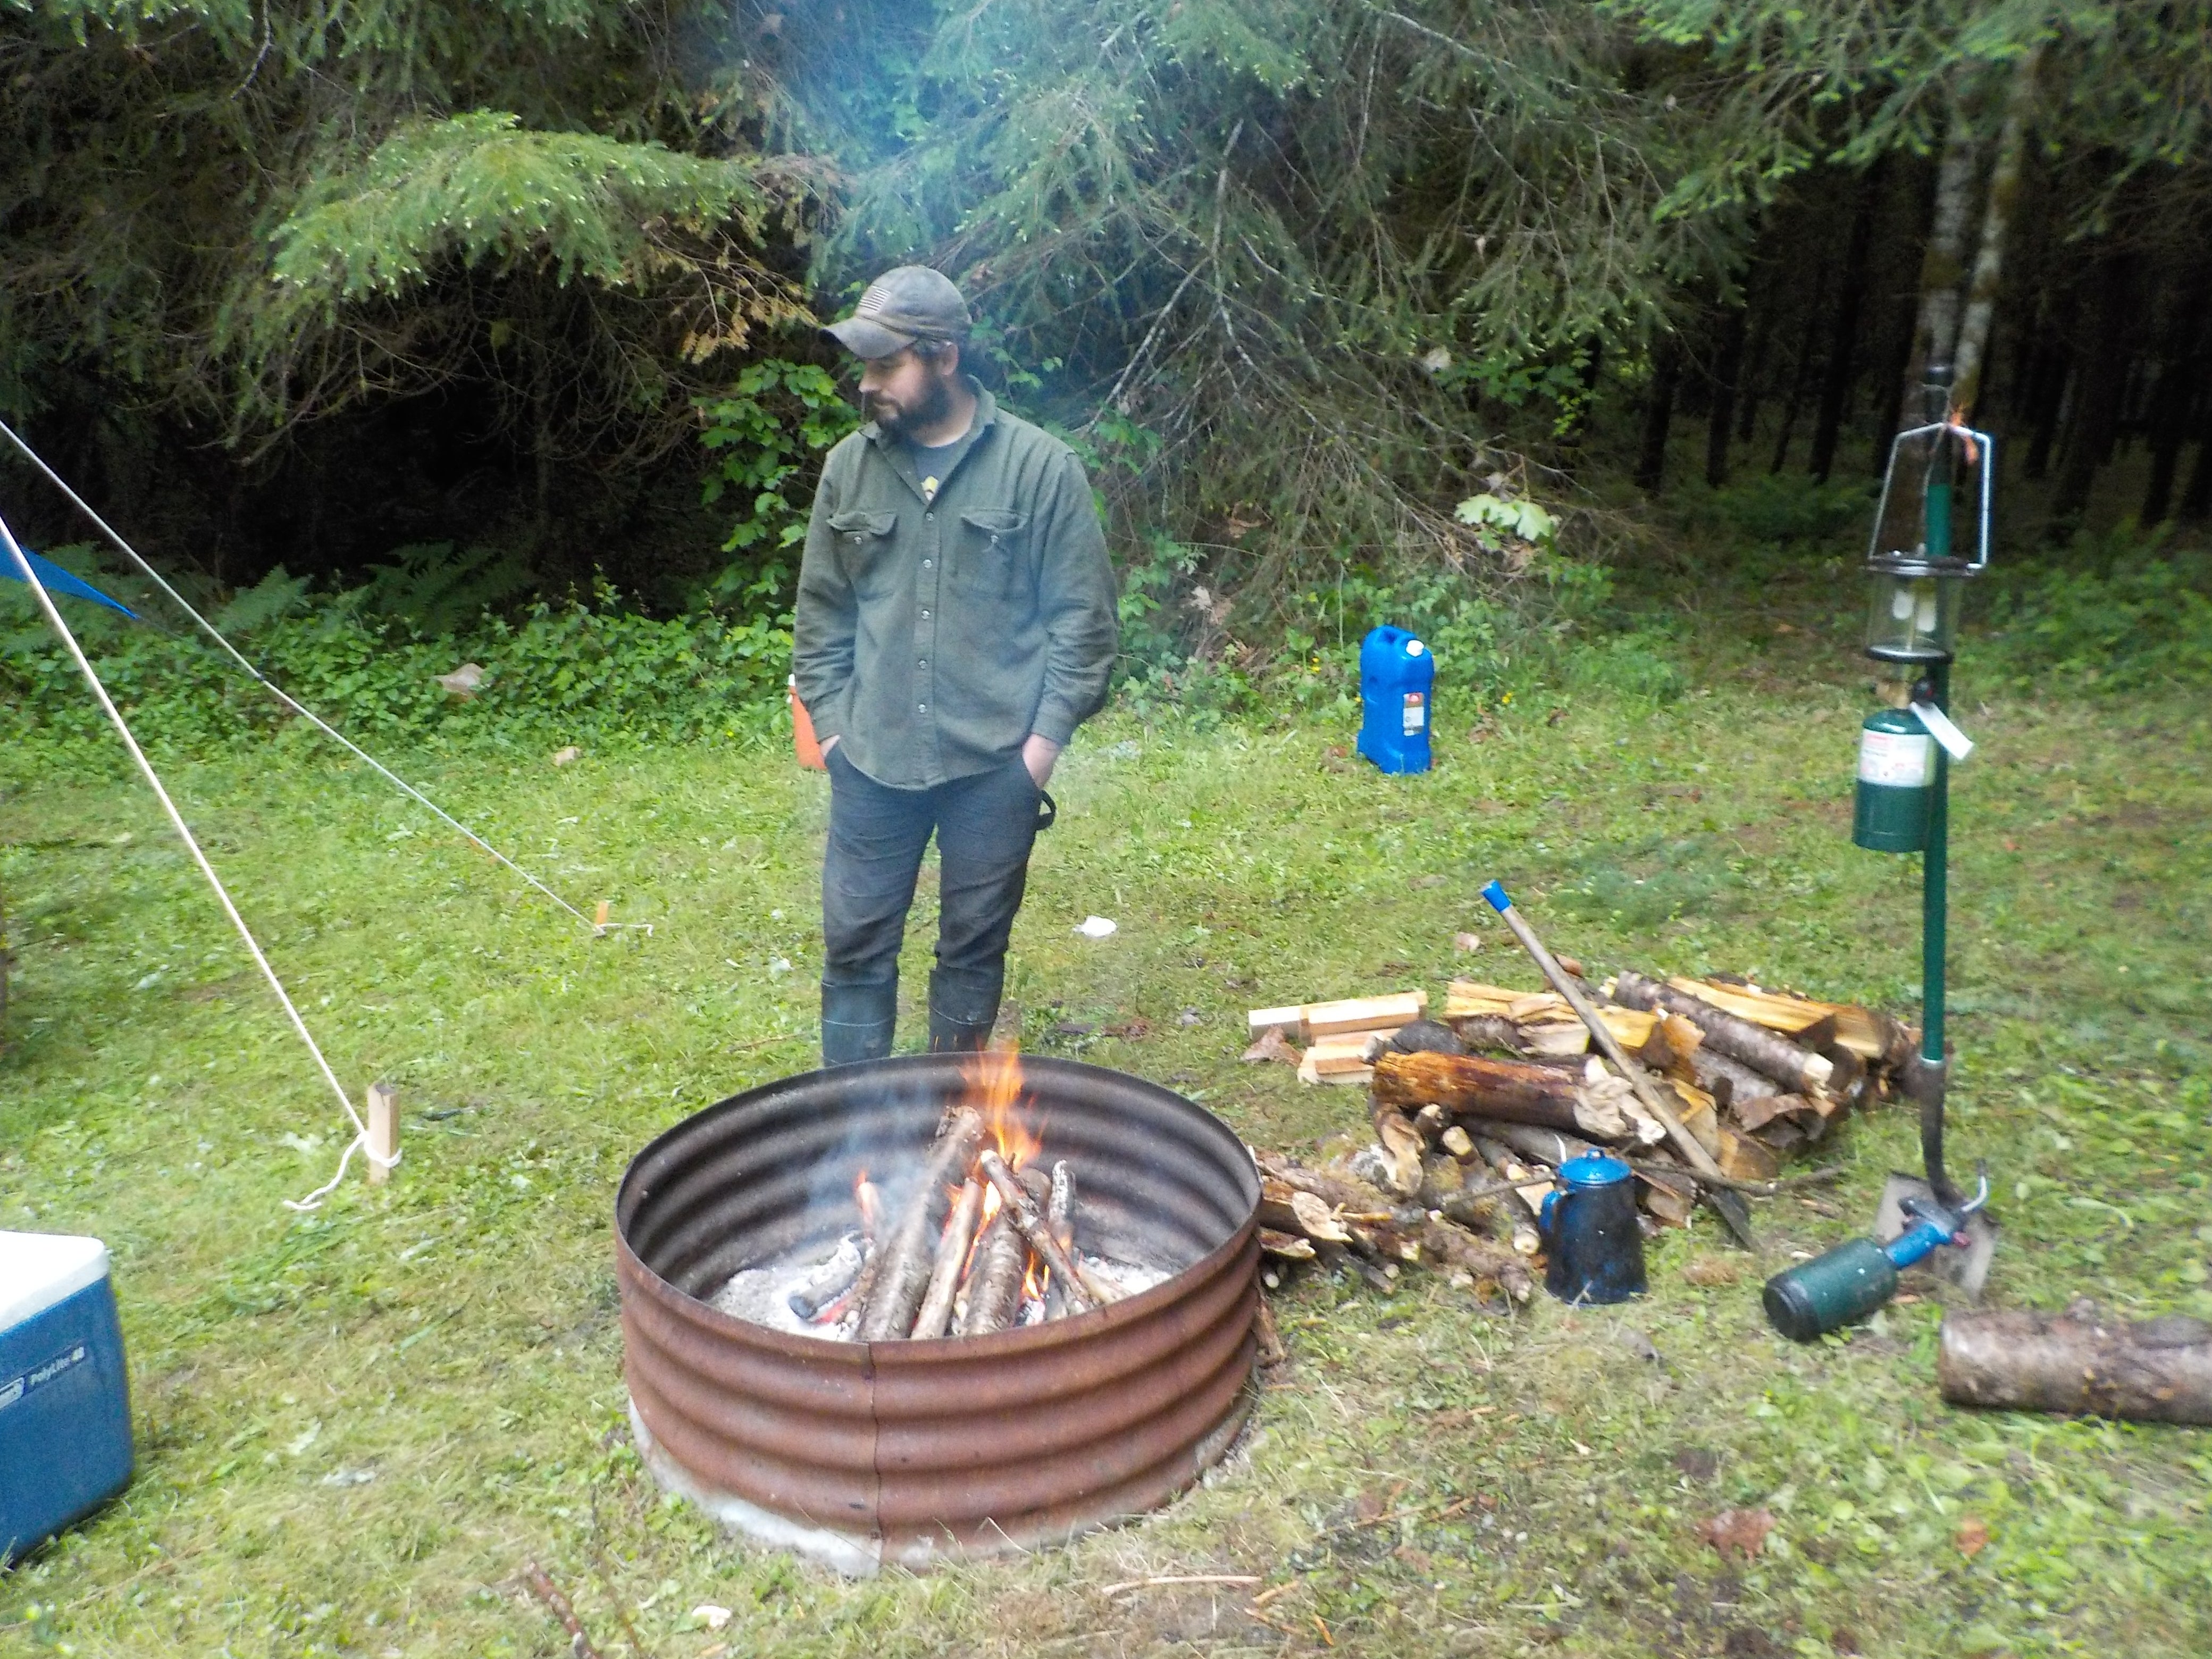 Fire pits for small campfires allowed